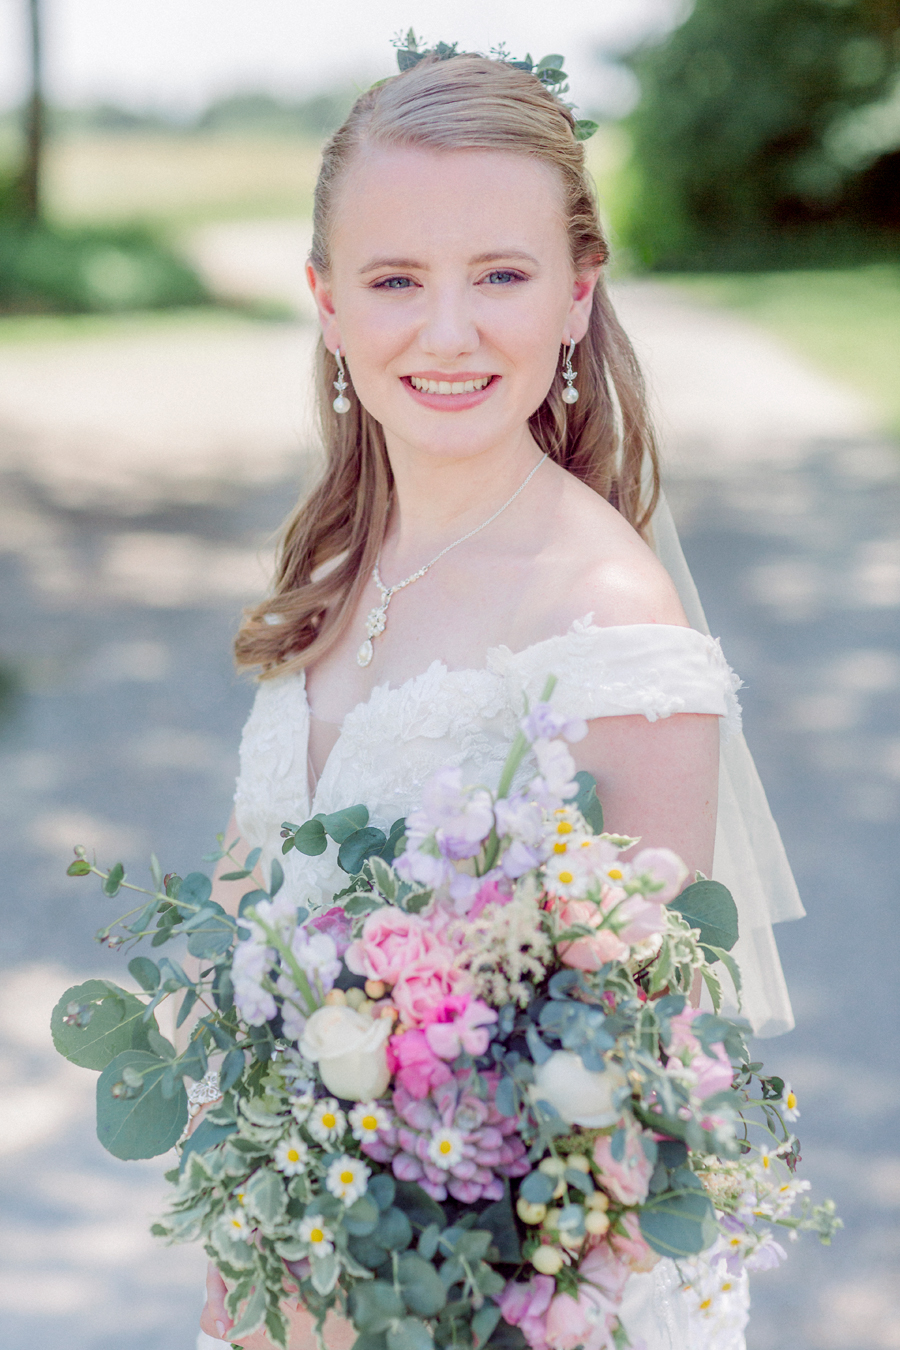 The bride smiles at the camera at a Blue Bell Farm wedding by Love Tree Studios.